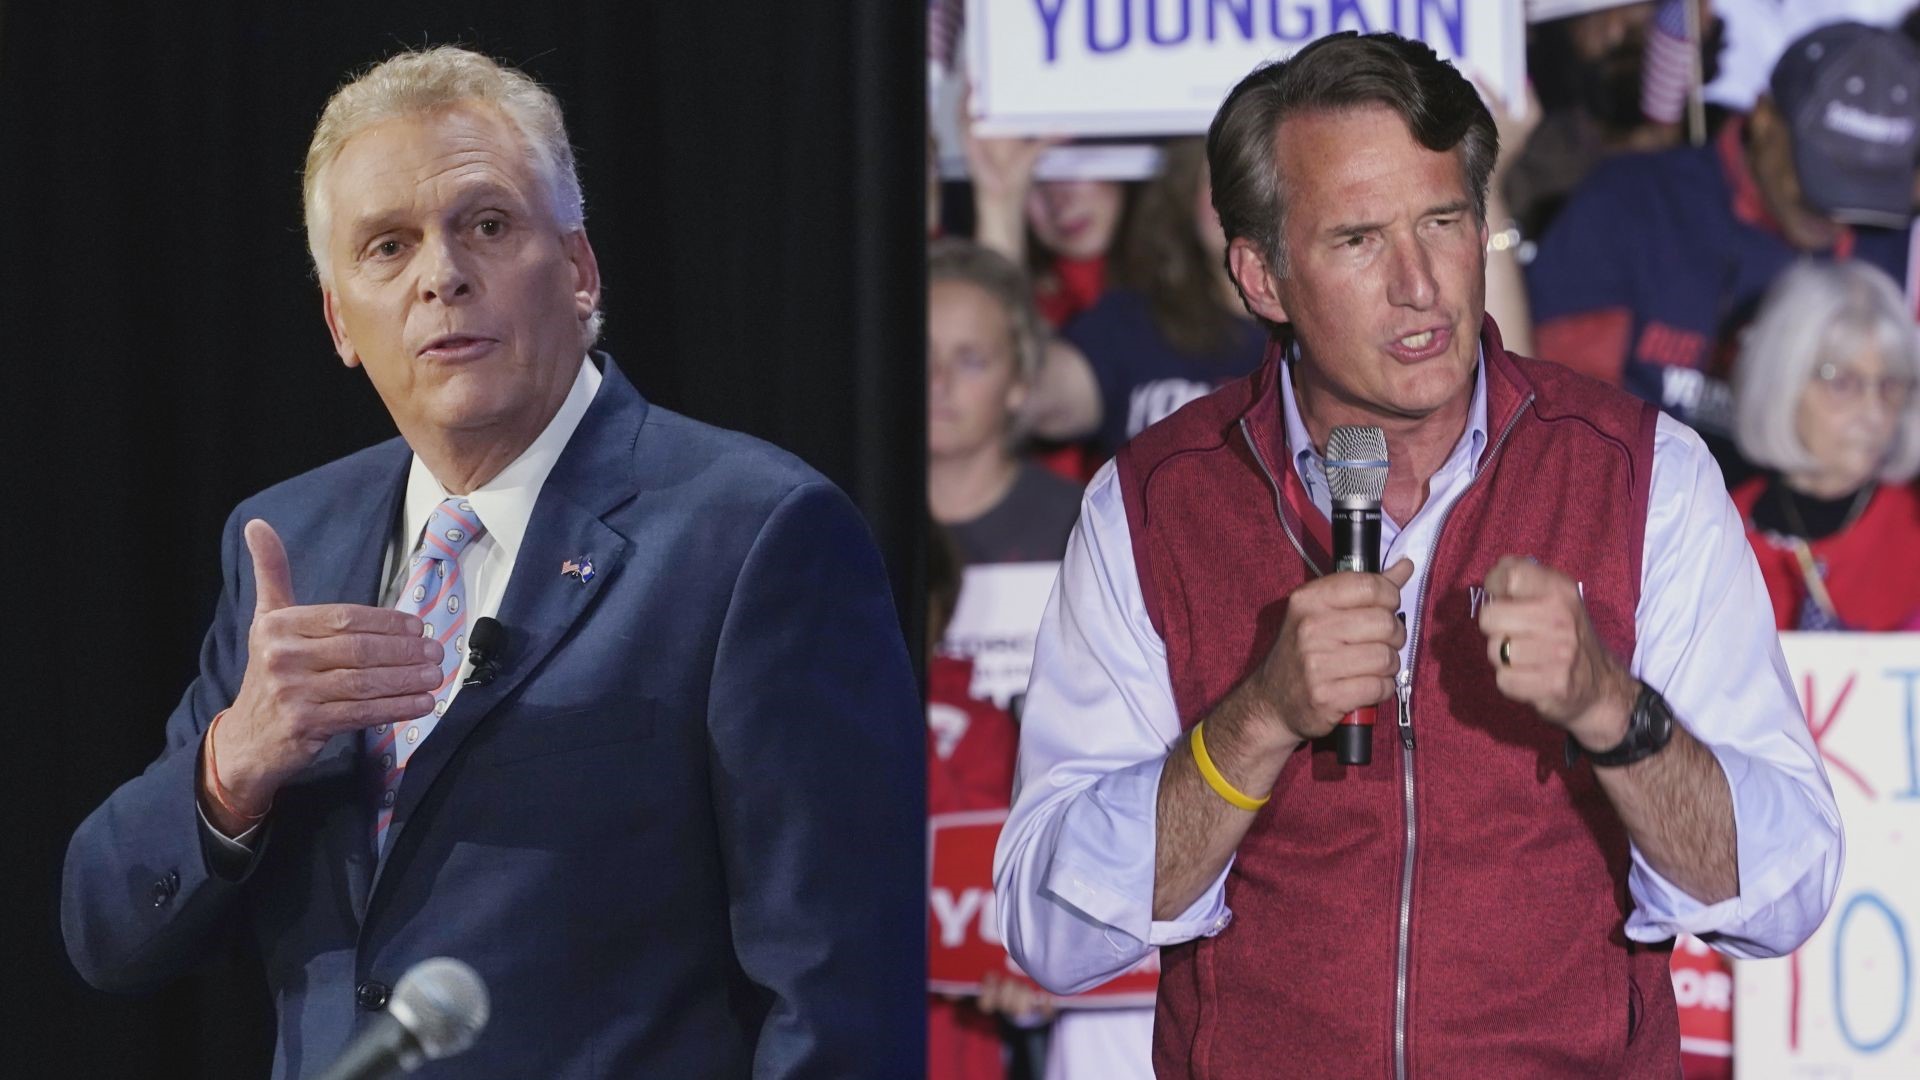 U.V.A.'s Center for Politics has shifted the Virginia governor's race from 'Leans Democratic' to 'Leans Republican' as battle between Youngkin and McAuliffe wraps up